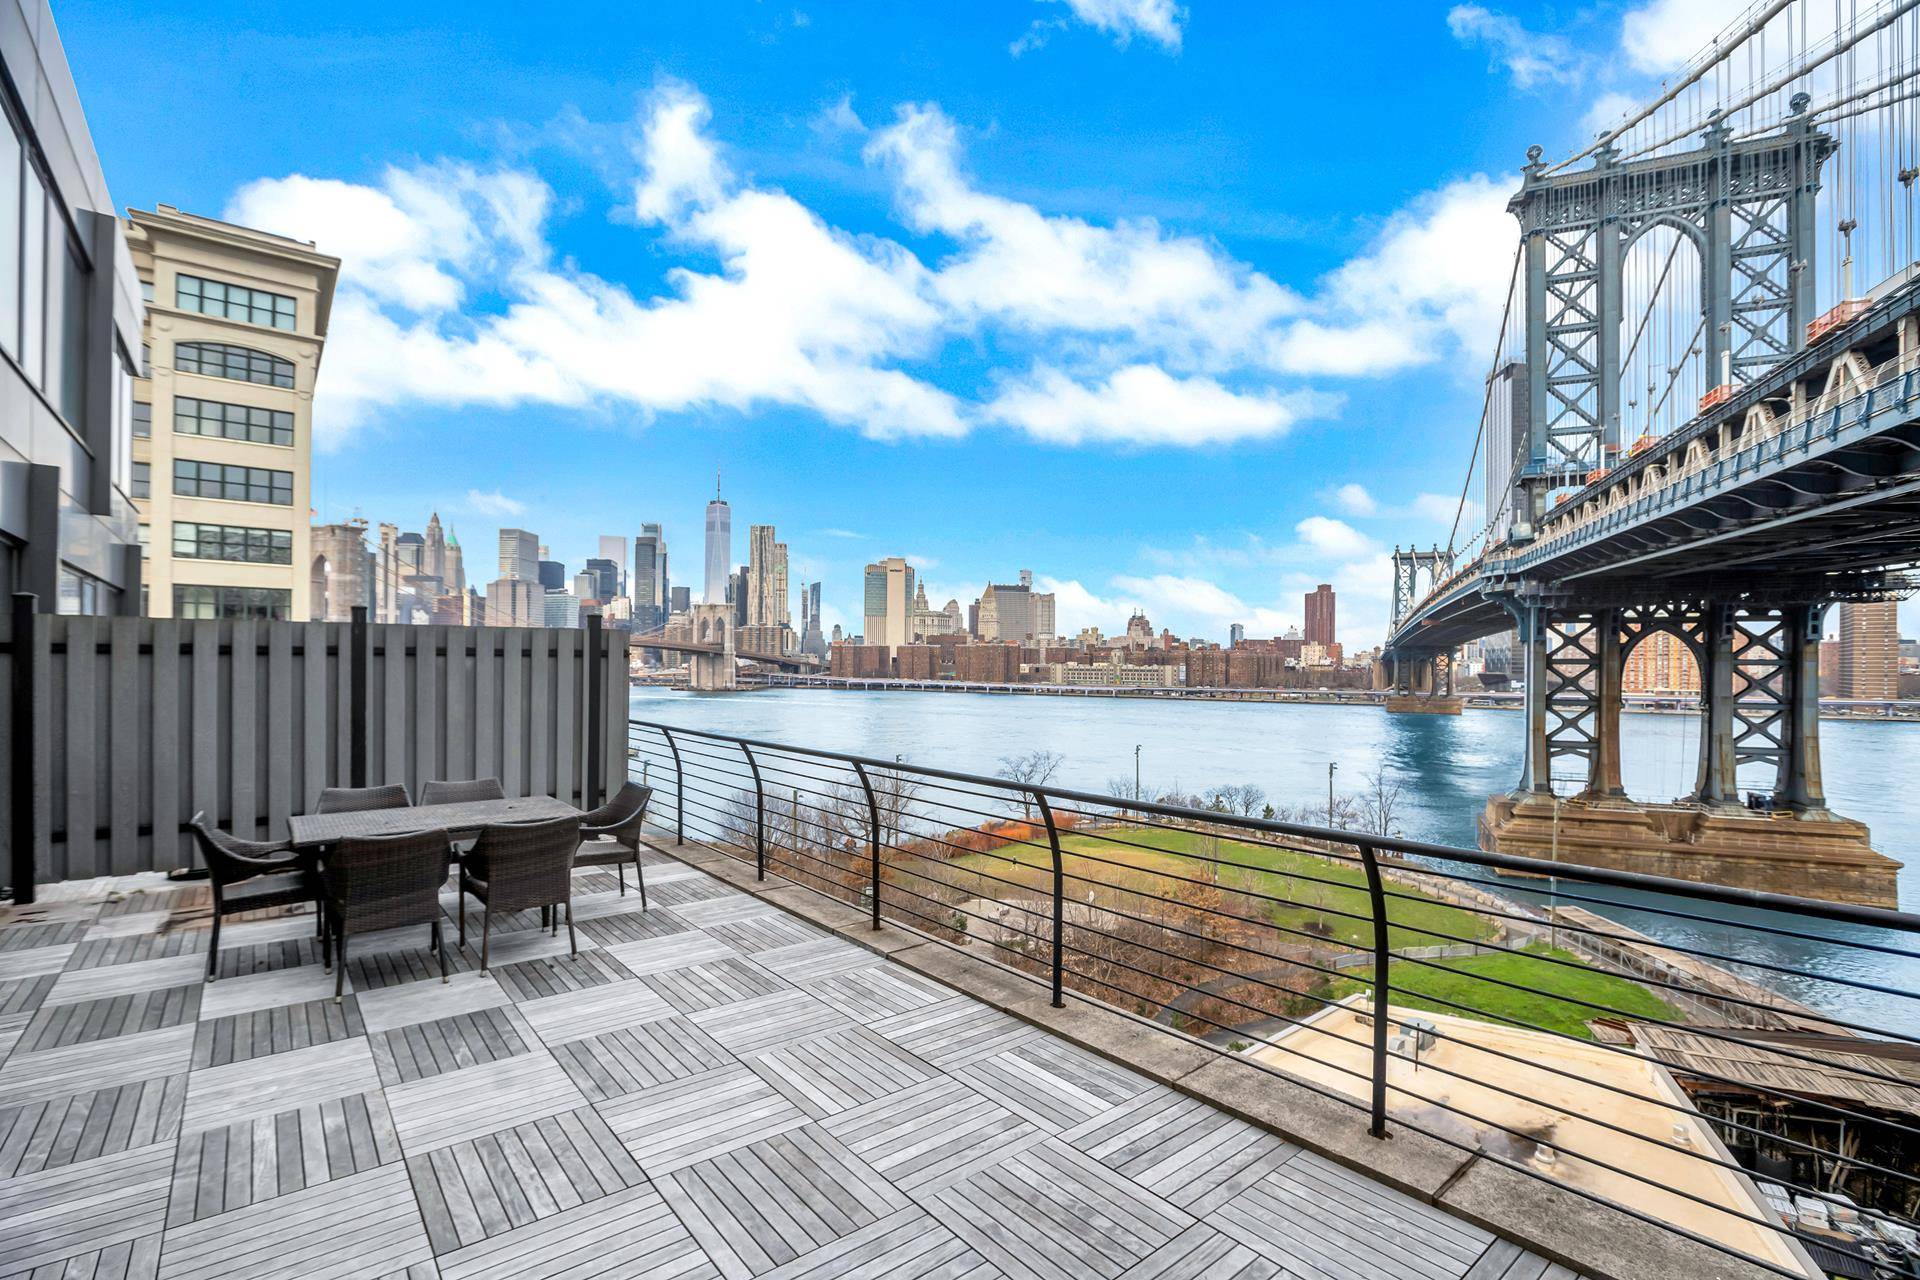 E N O R M O U S PRIVATE OUTDOOR SPACE WITH NECK SNAPPING VIEWS OF MANHATTEN OVER THE EAST RIVER AND including both Brooklyn and Manhattan Bridges.